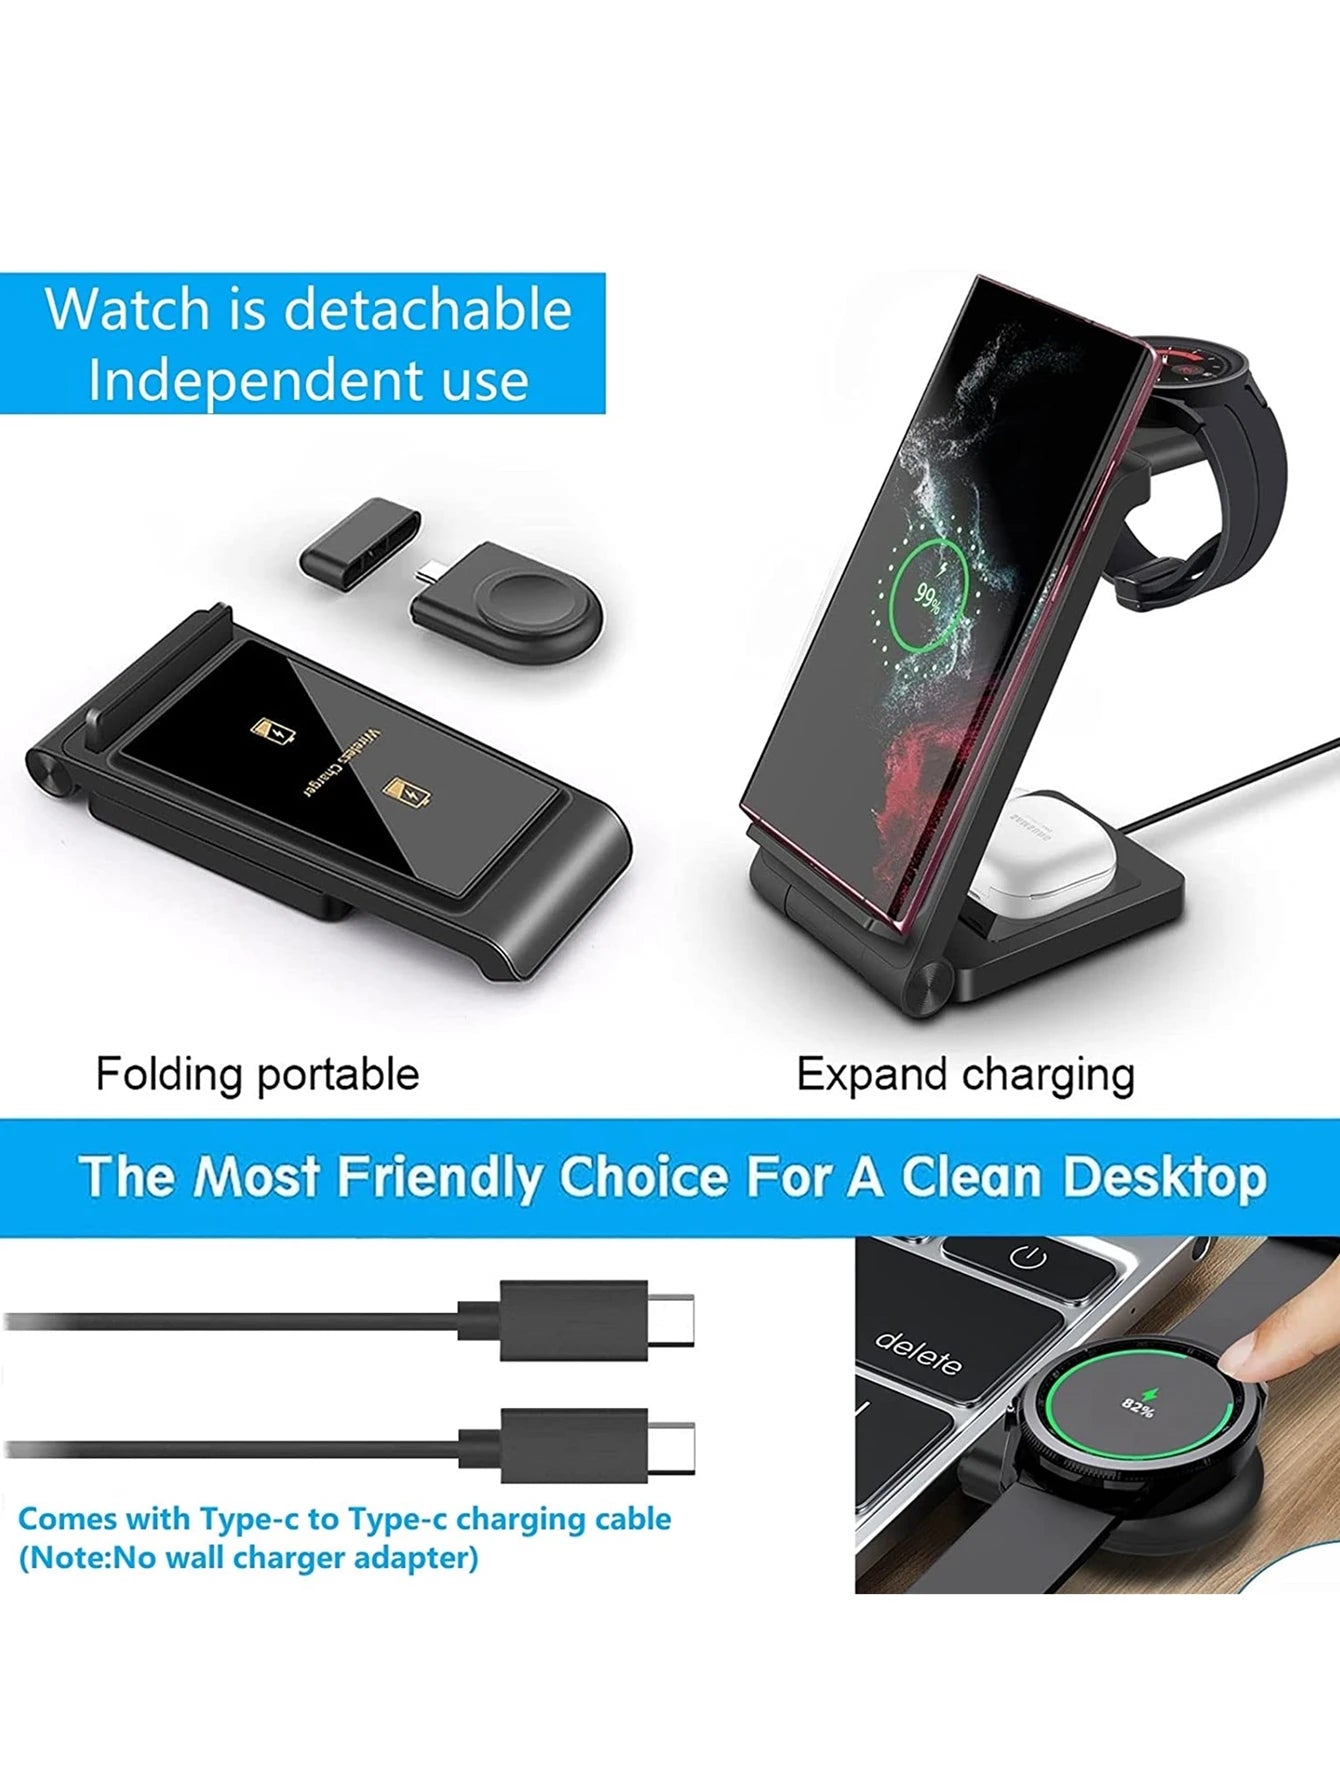 Professional title: "Multi-Device Wireless Fast Charging Station for Samsung Galaxy Devices and Galaxy Watch"